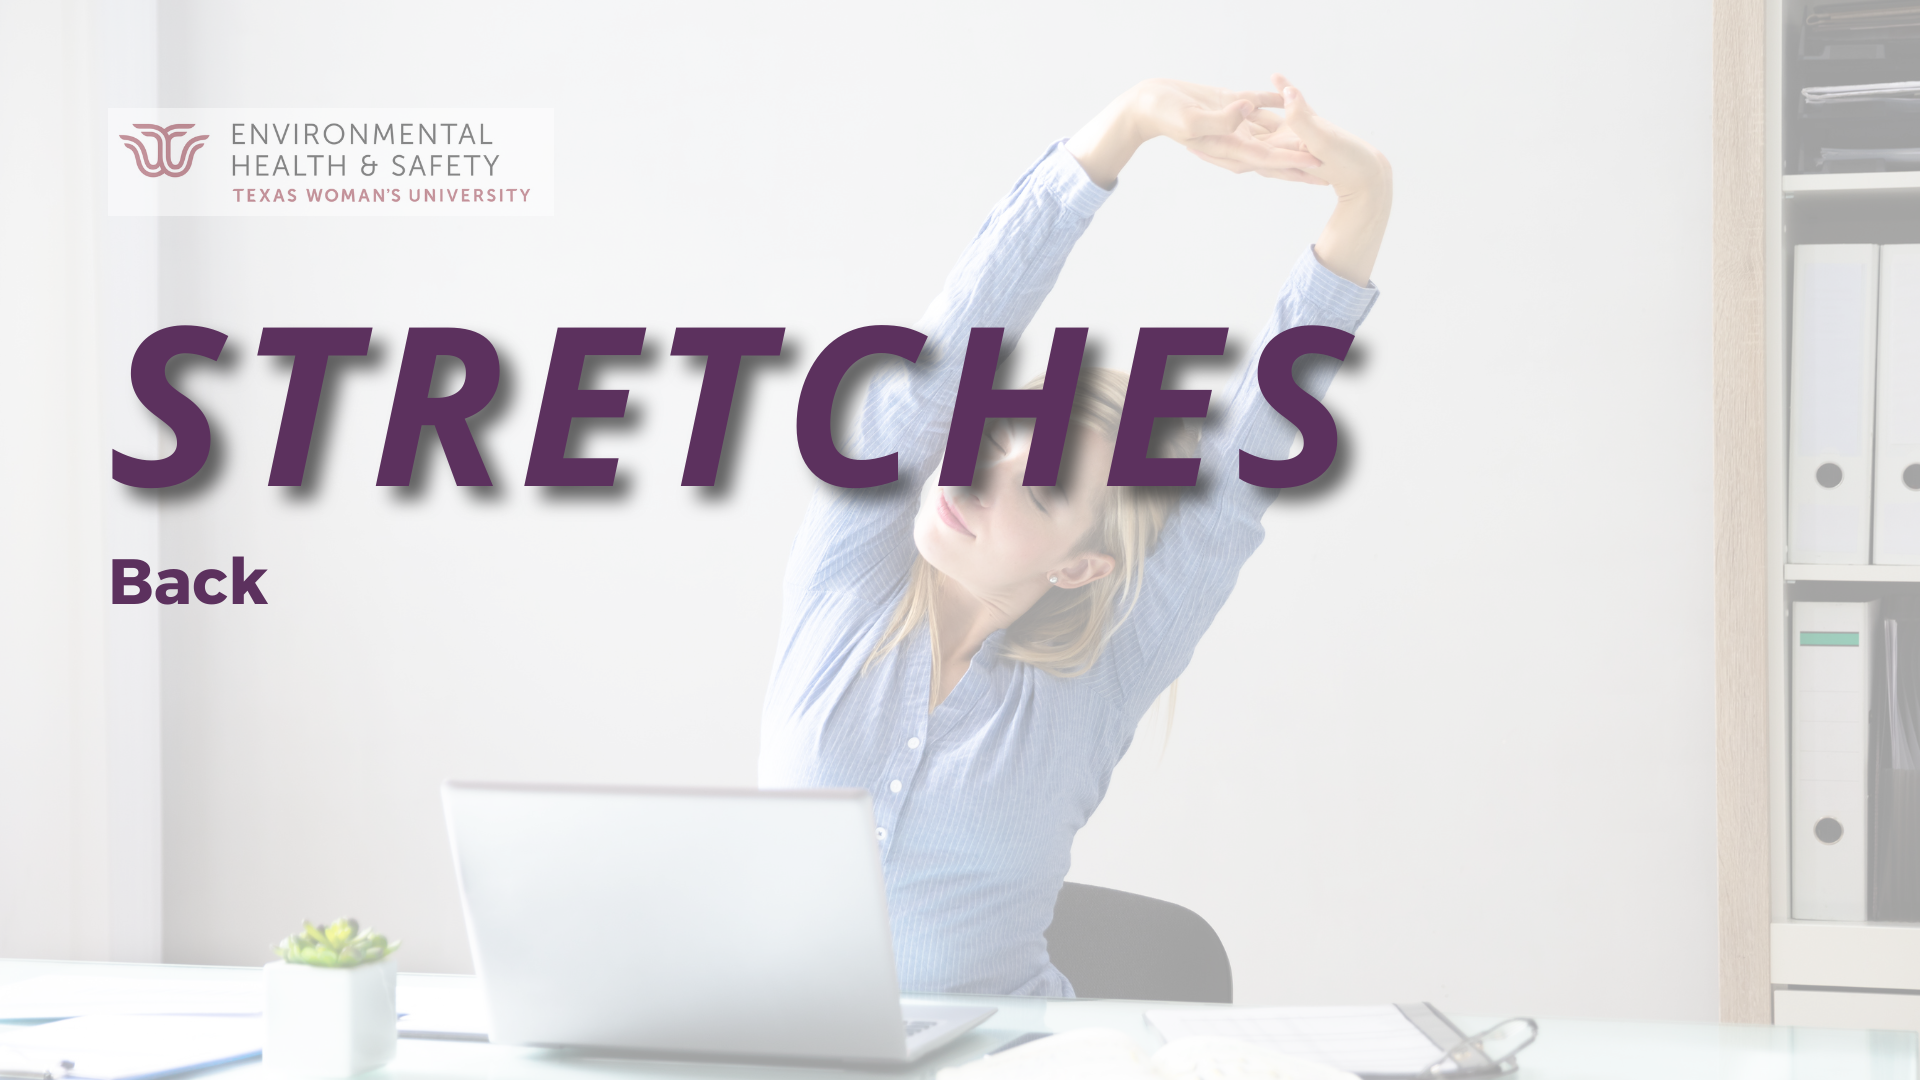 Background is a photo of a woman in a blue shirt sitting at a desk with a laptop and stretching with her arms overhead. In the foreground is text that says "Stretches: Back" and has the TWU Environmental Health and Safety logo